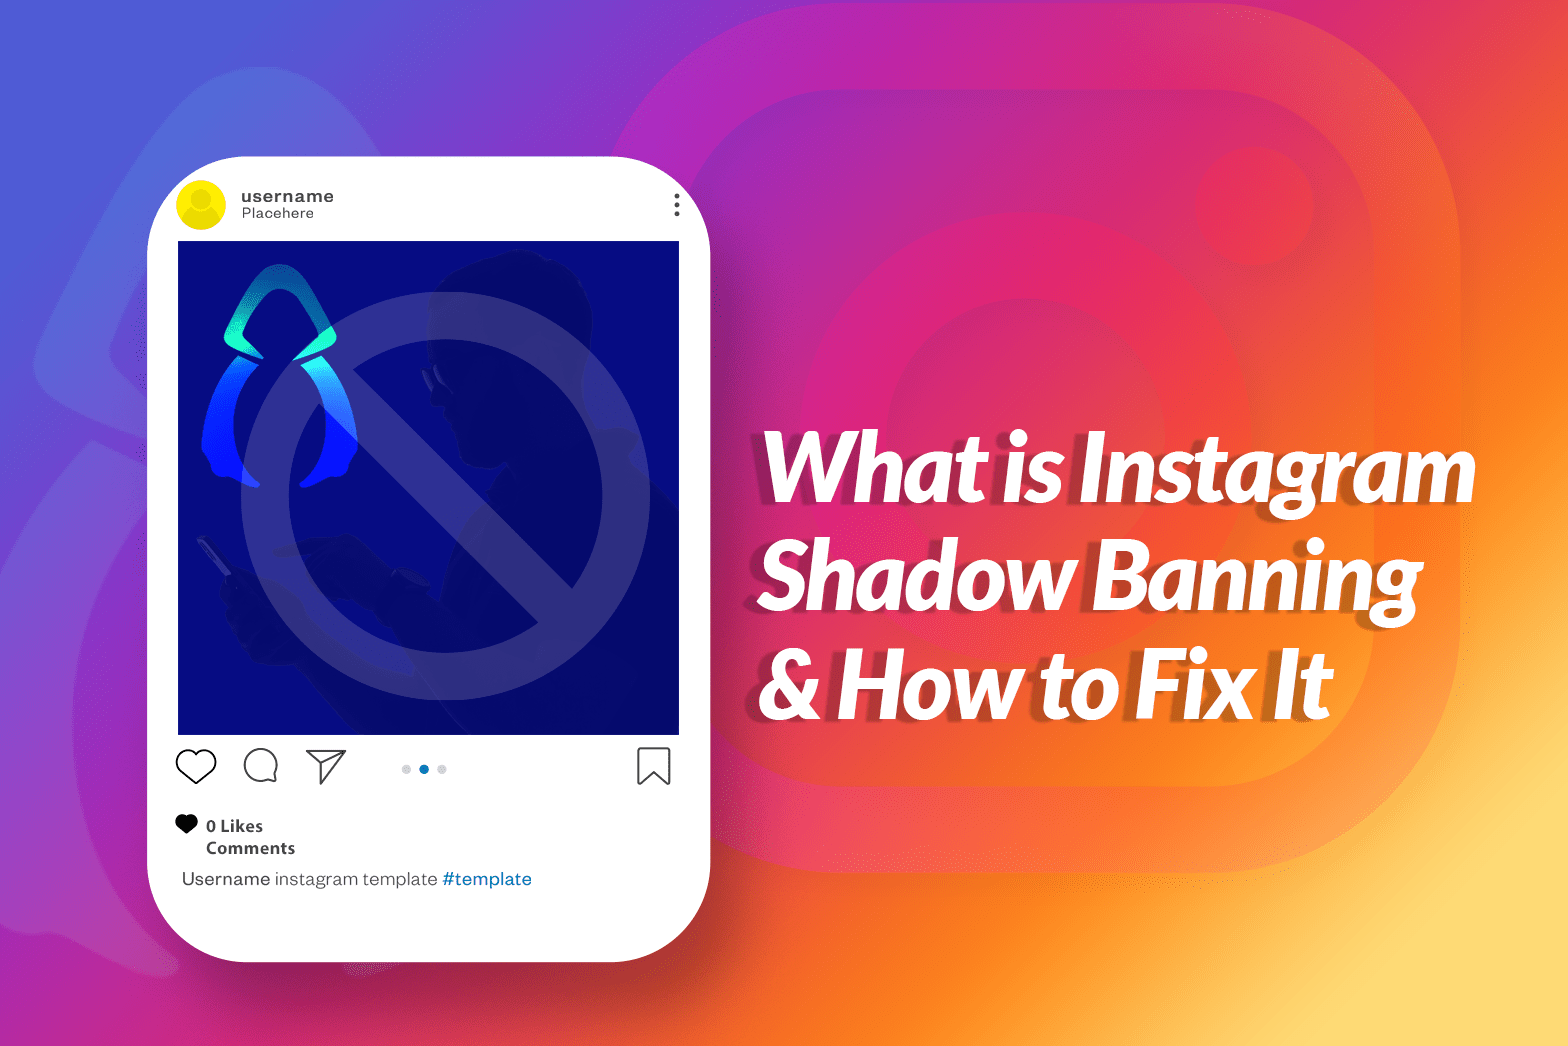 What is Instagram Shadow Banning and How to Fix It?